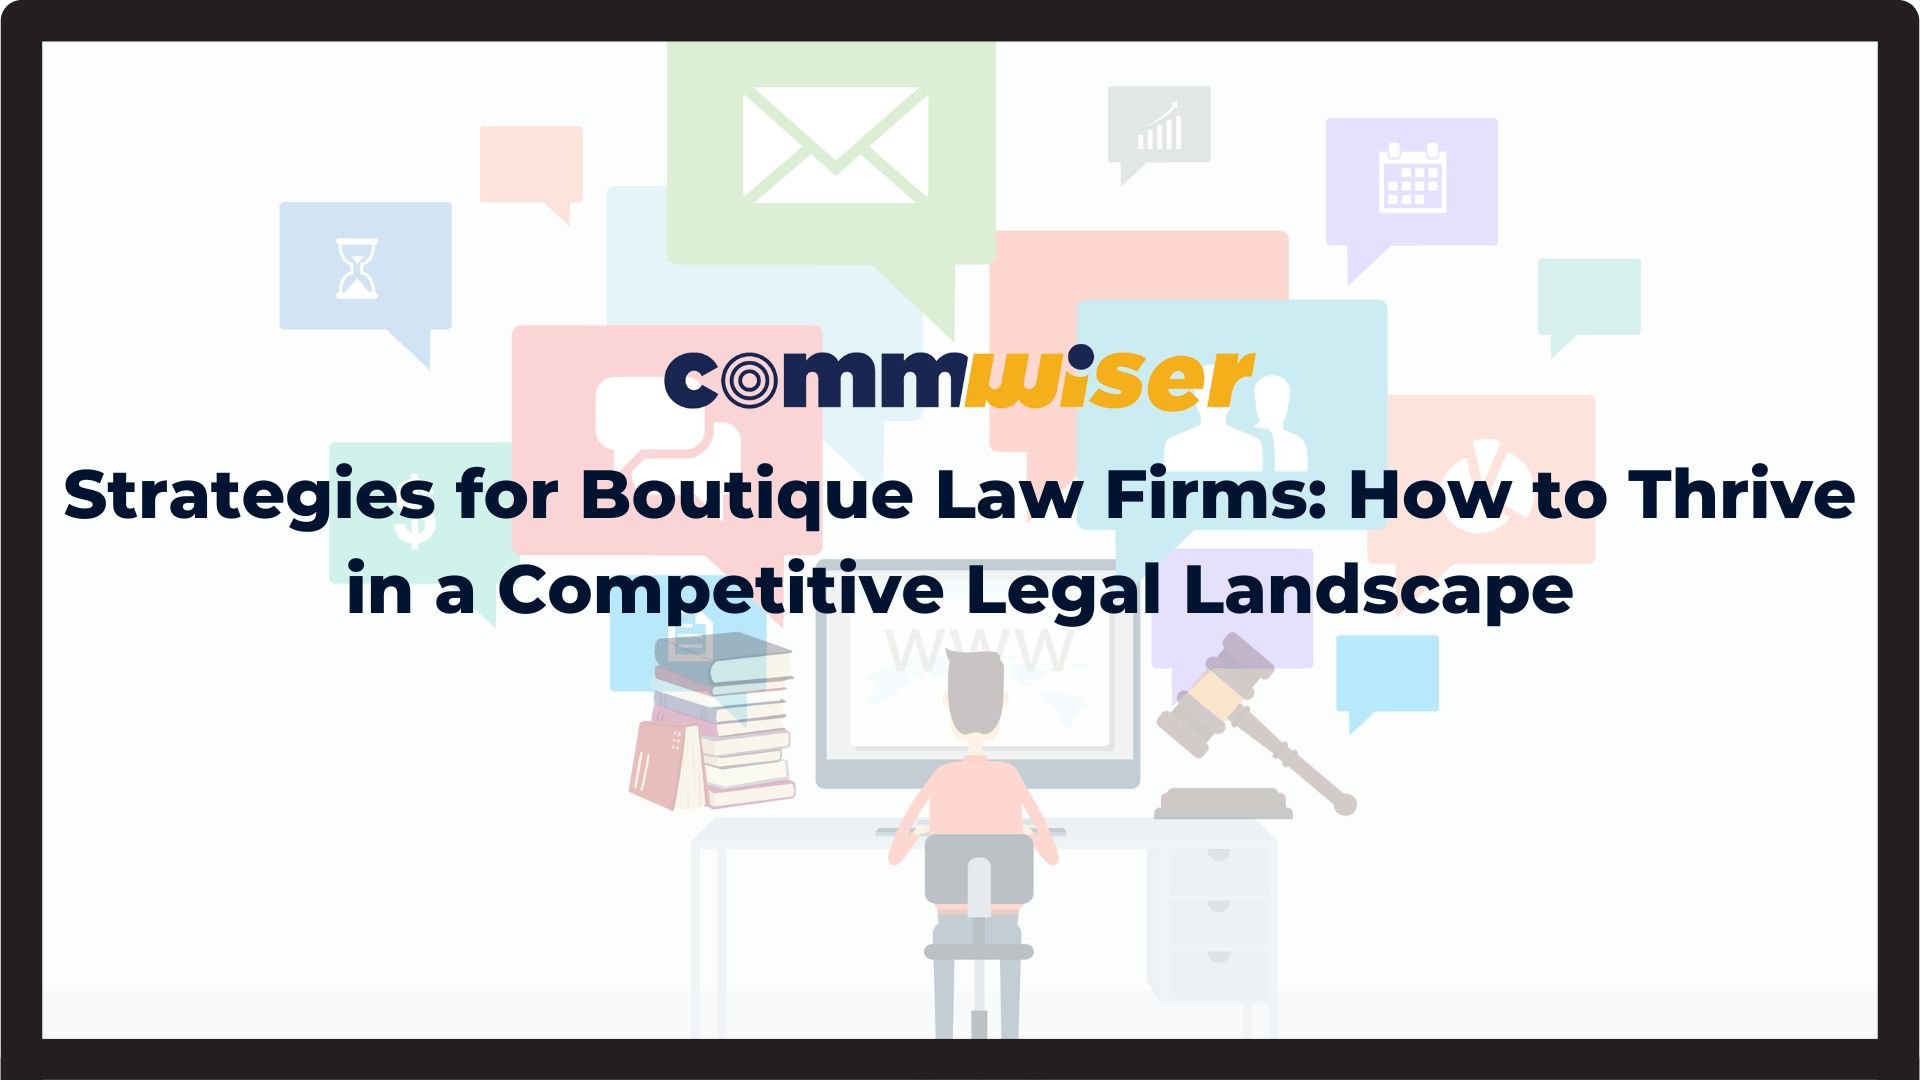 STRATEGIES FOR BOUTIQUE LAW FIRMS: HOW TO THRIVE IN A COMPETITIVE LEGAL LANDSCAPE